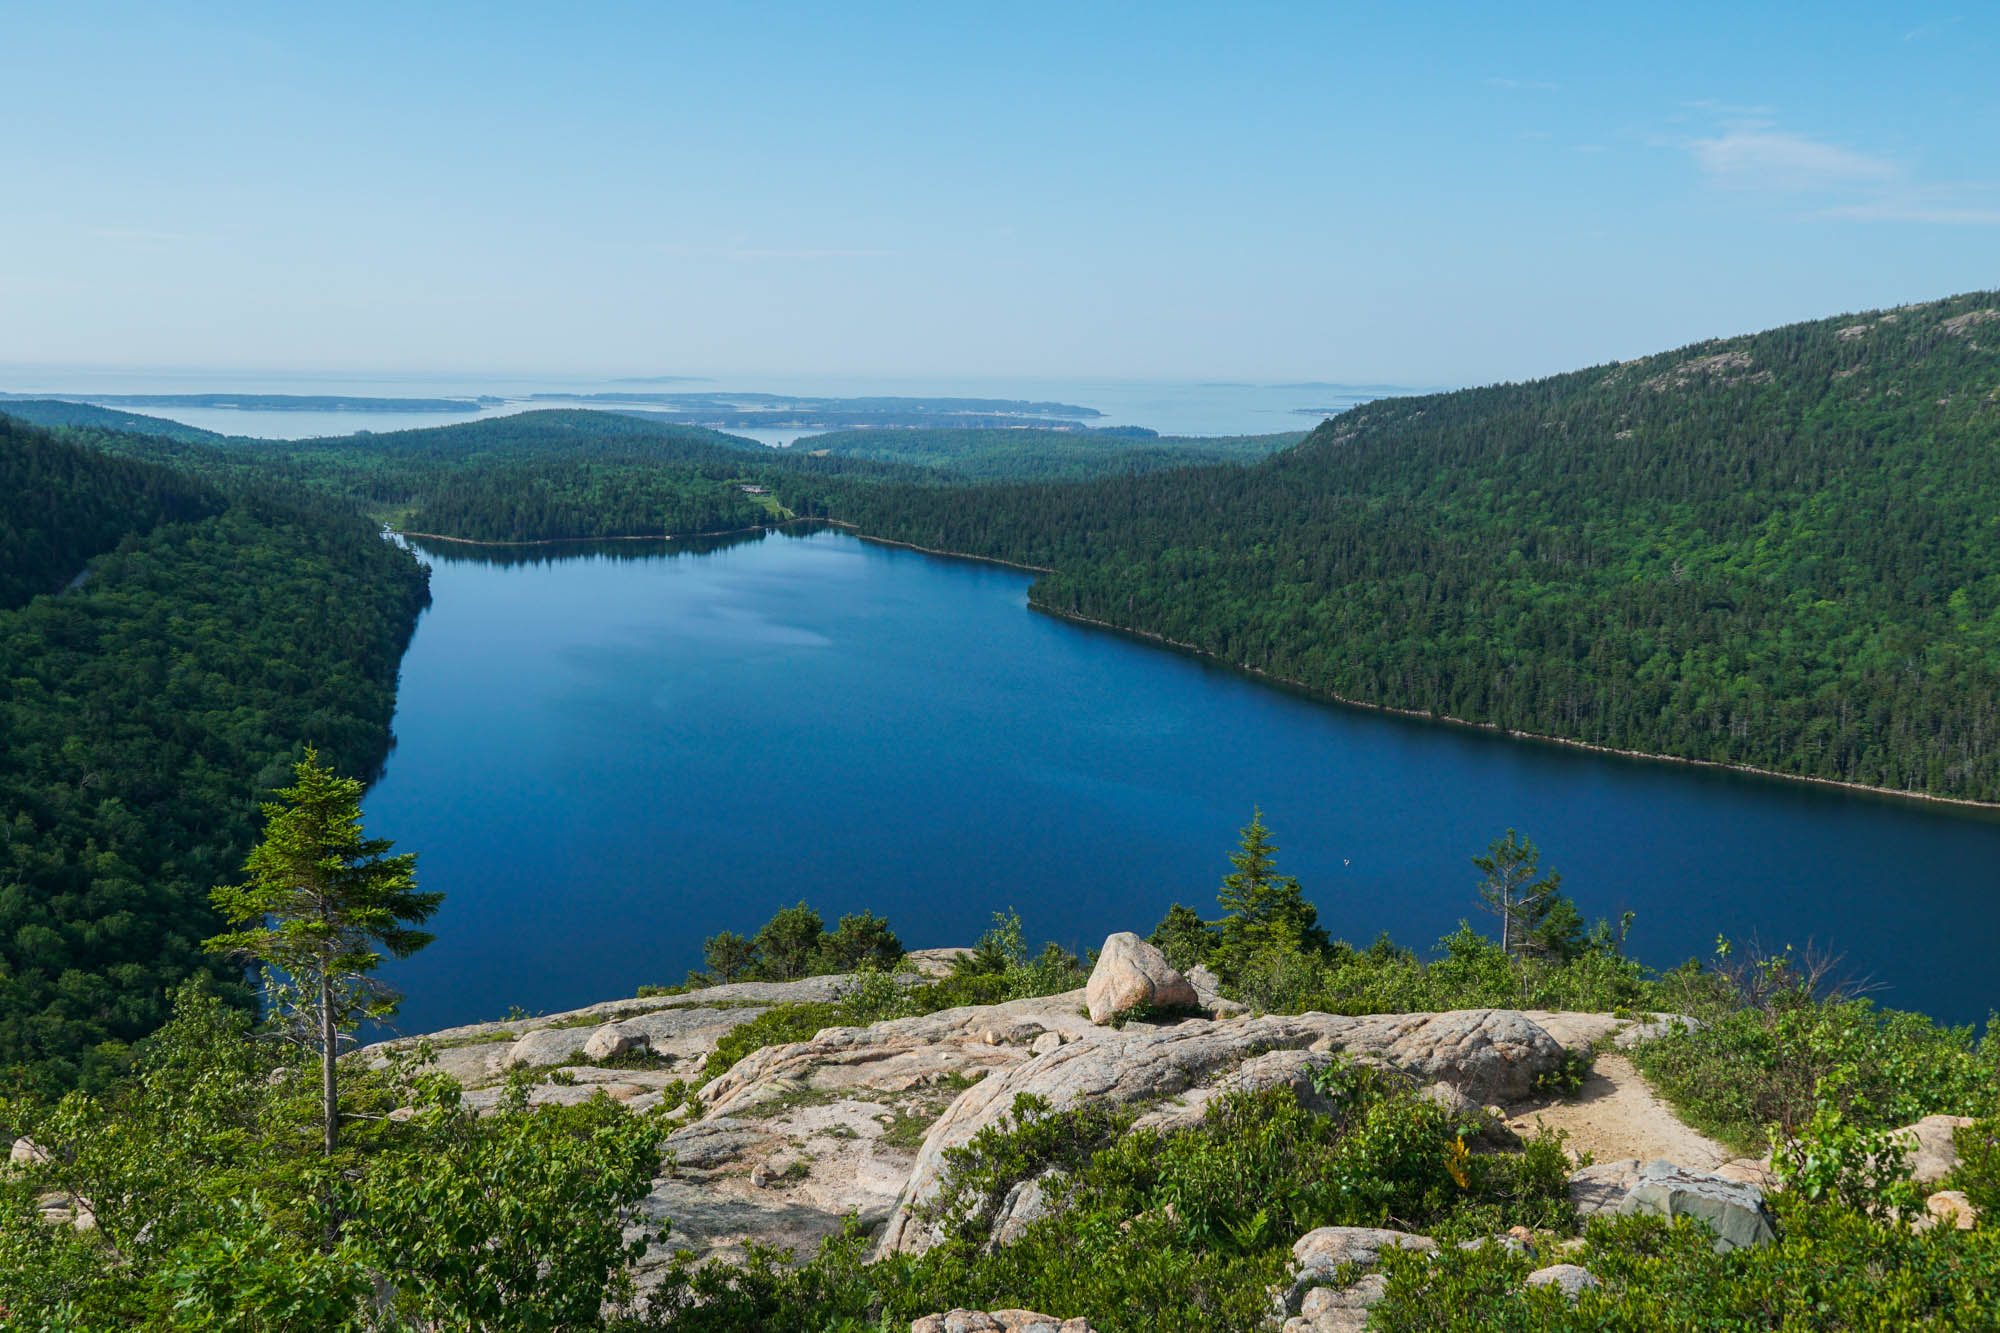 View of Jordan Pond from the Bubbles Summit